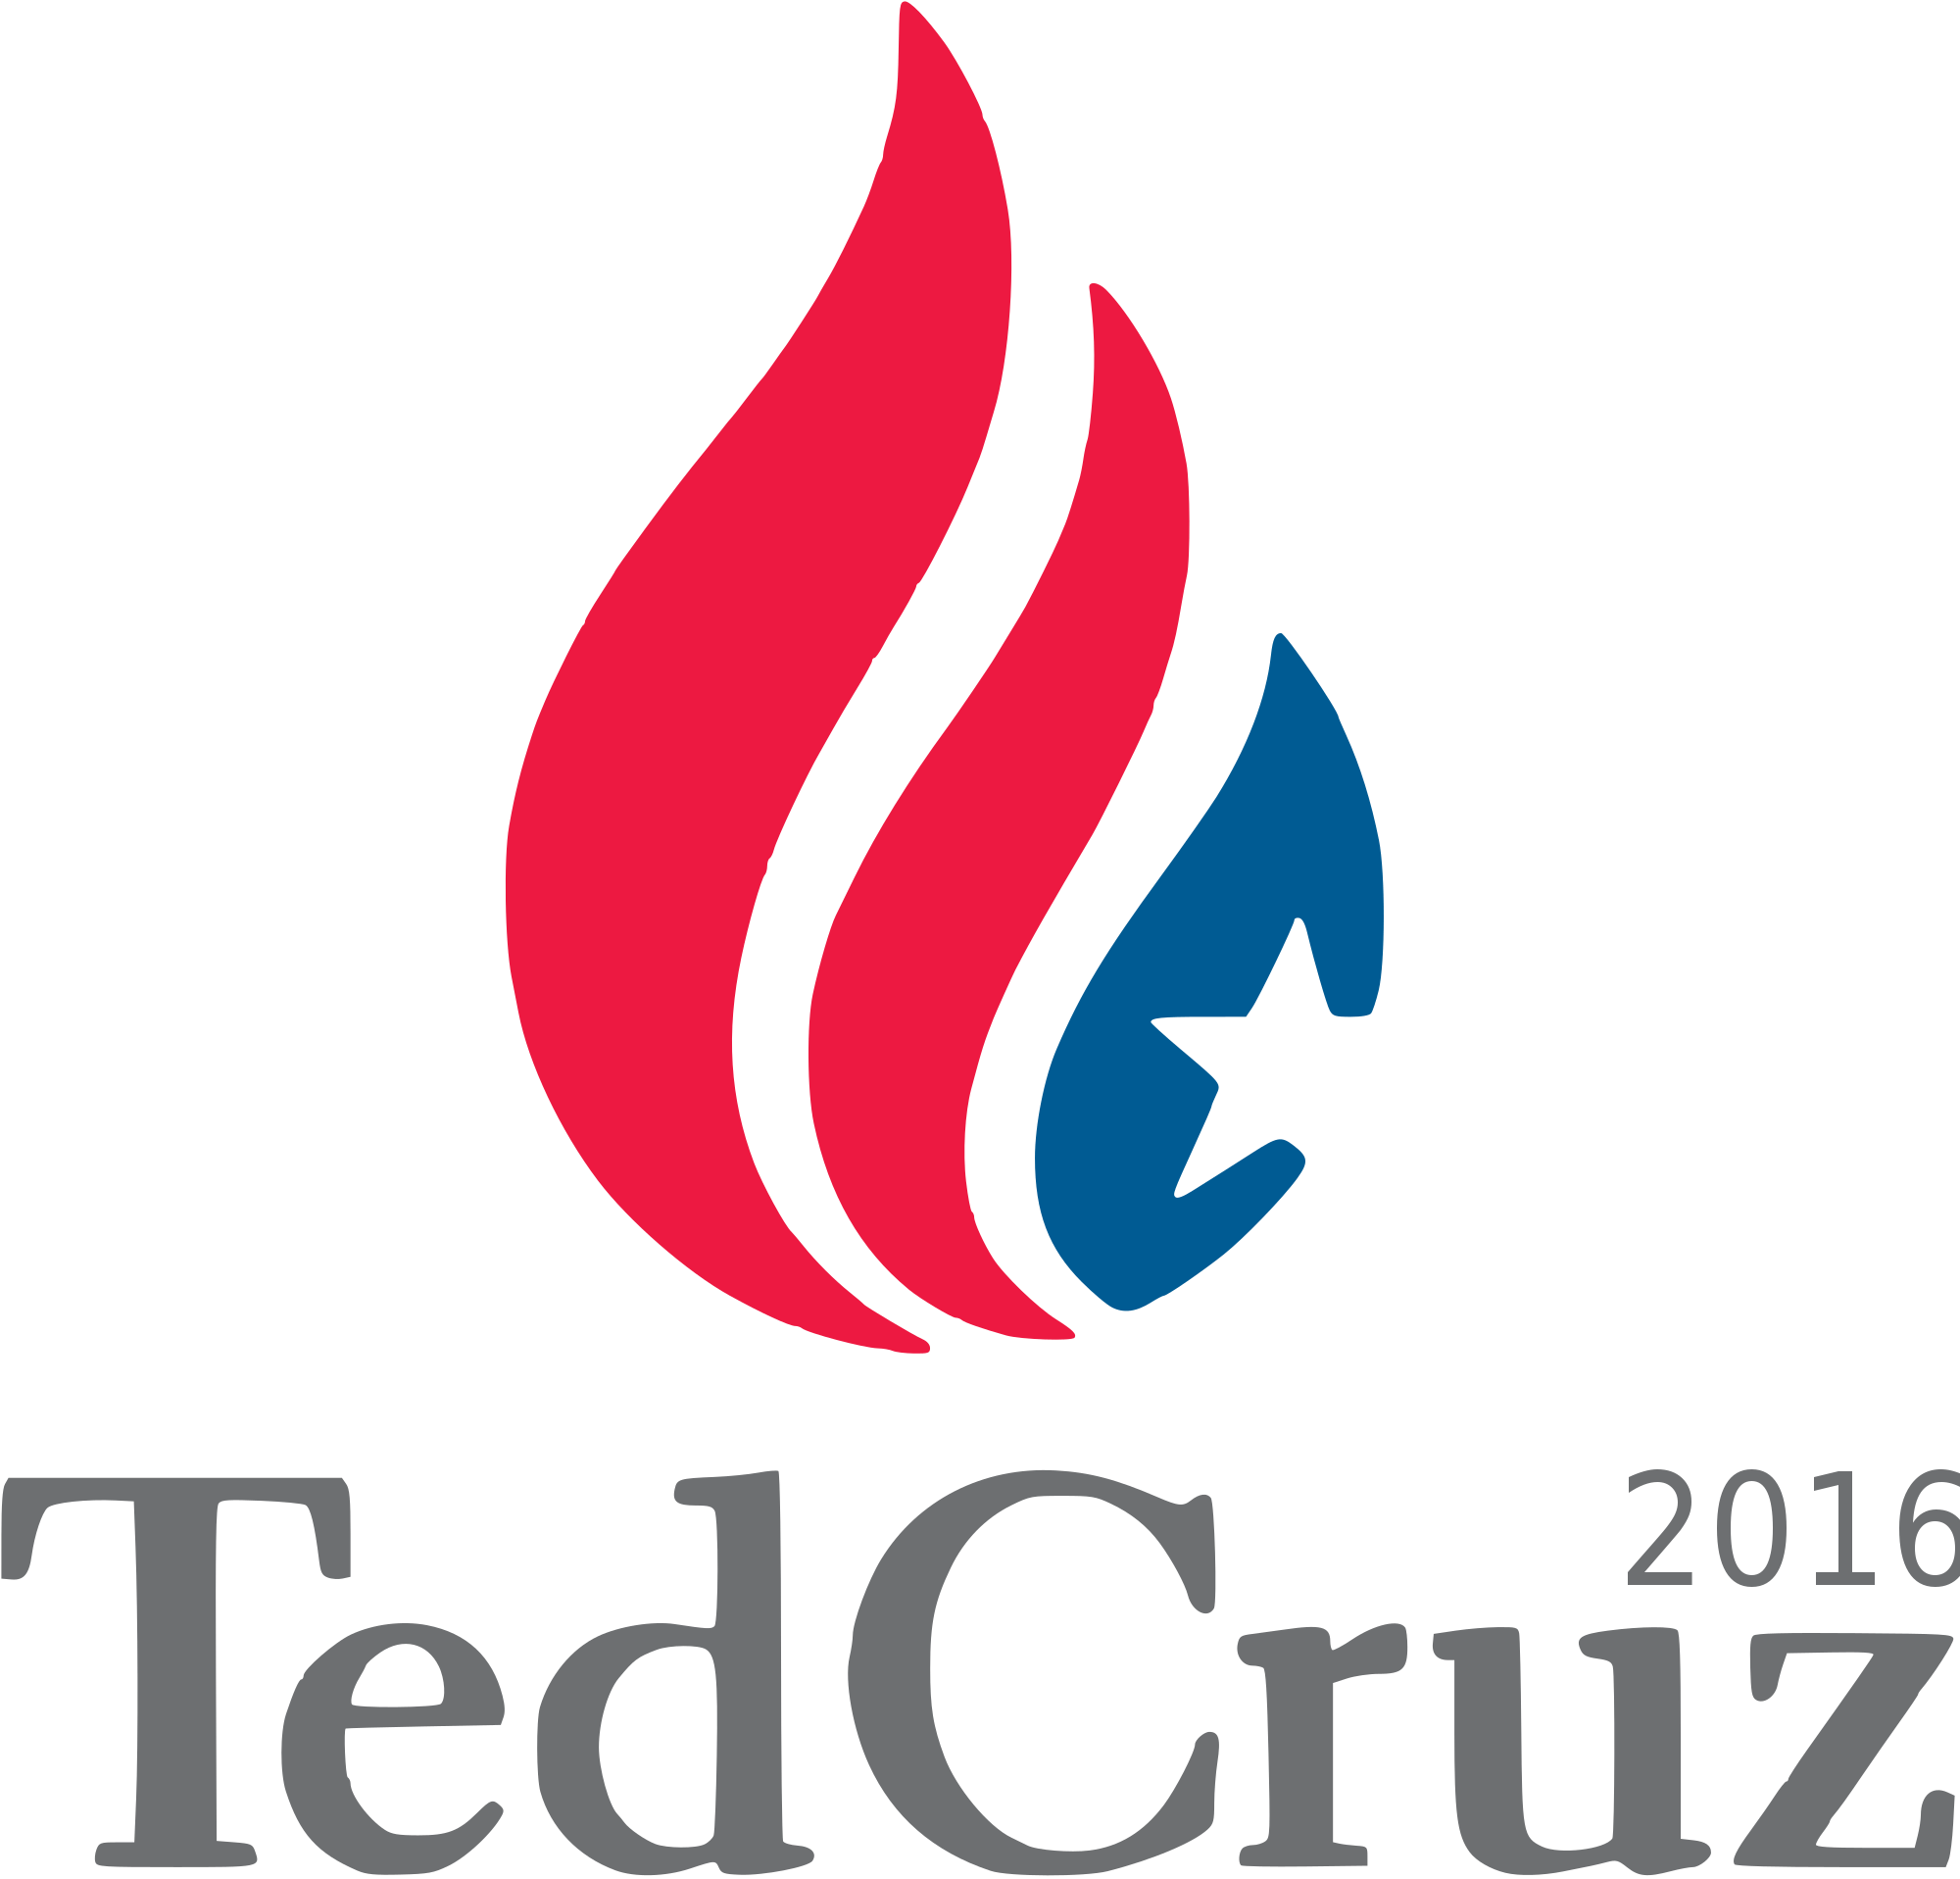 Election Logo - File:Ted Cruz 2016 presidential election logo.svg - Wikimedia Commons